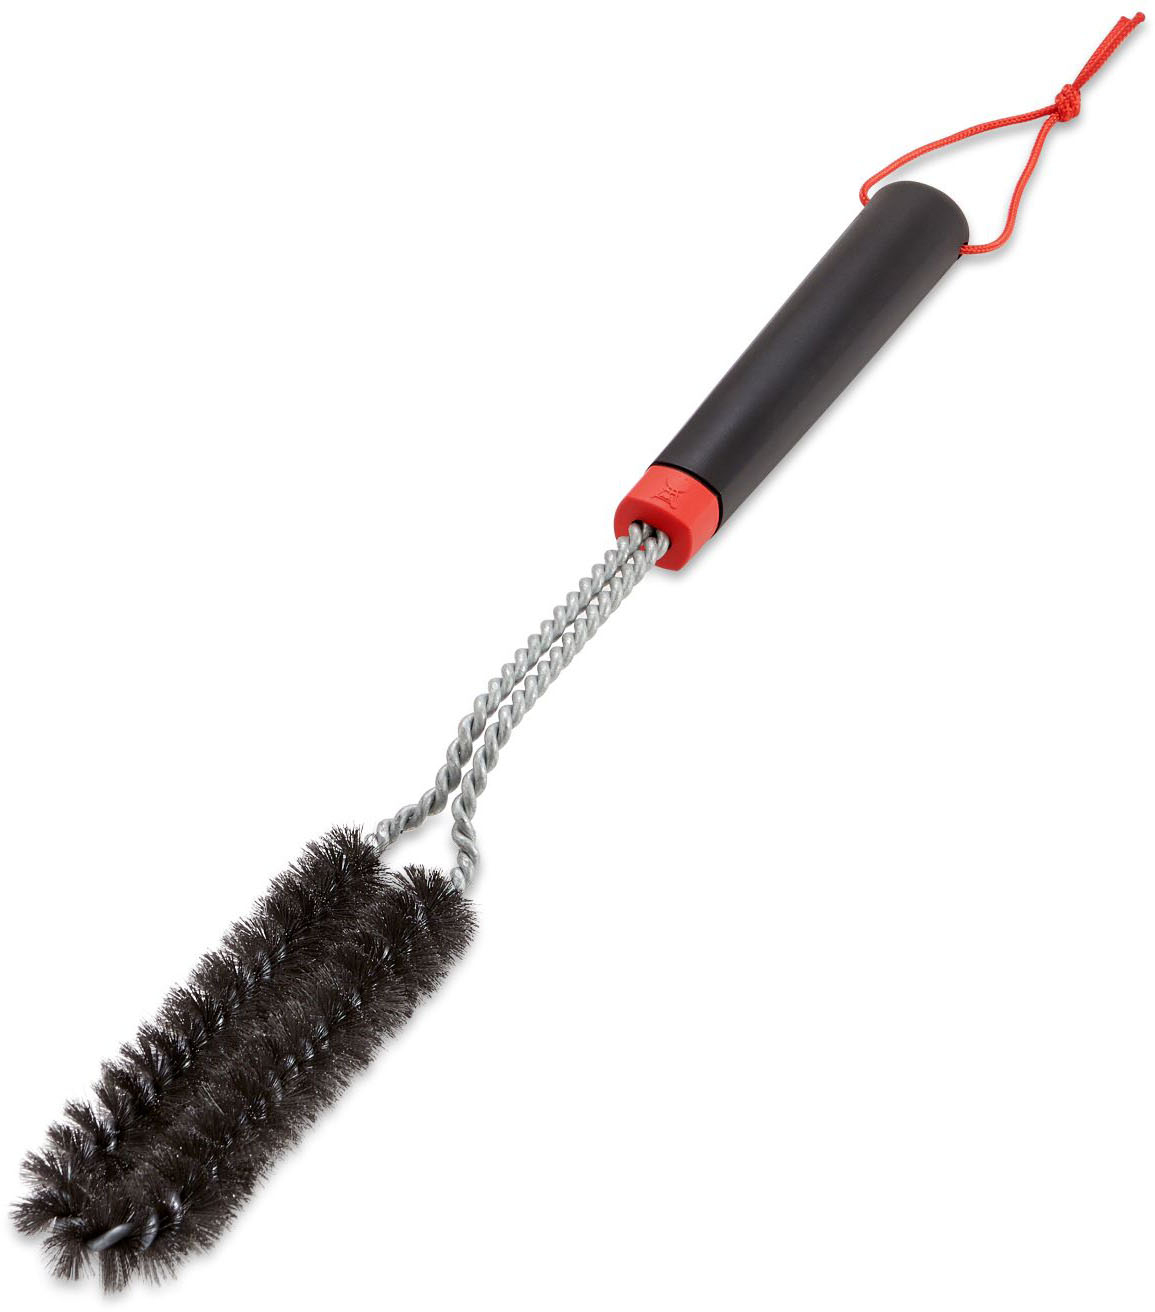 HD Designs Grill Deluxe Triple Action Grill Brush - Black, 1 ct - Fry's  Food Stores